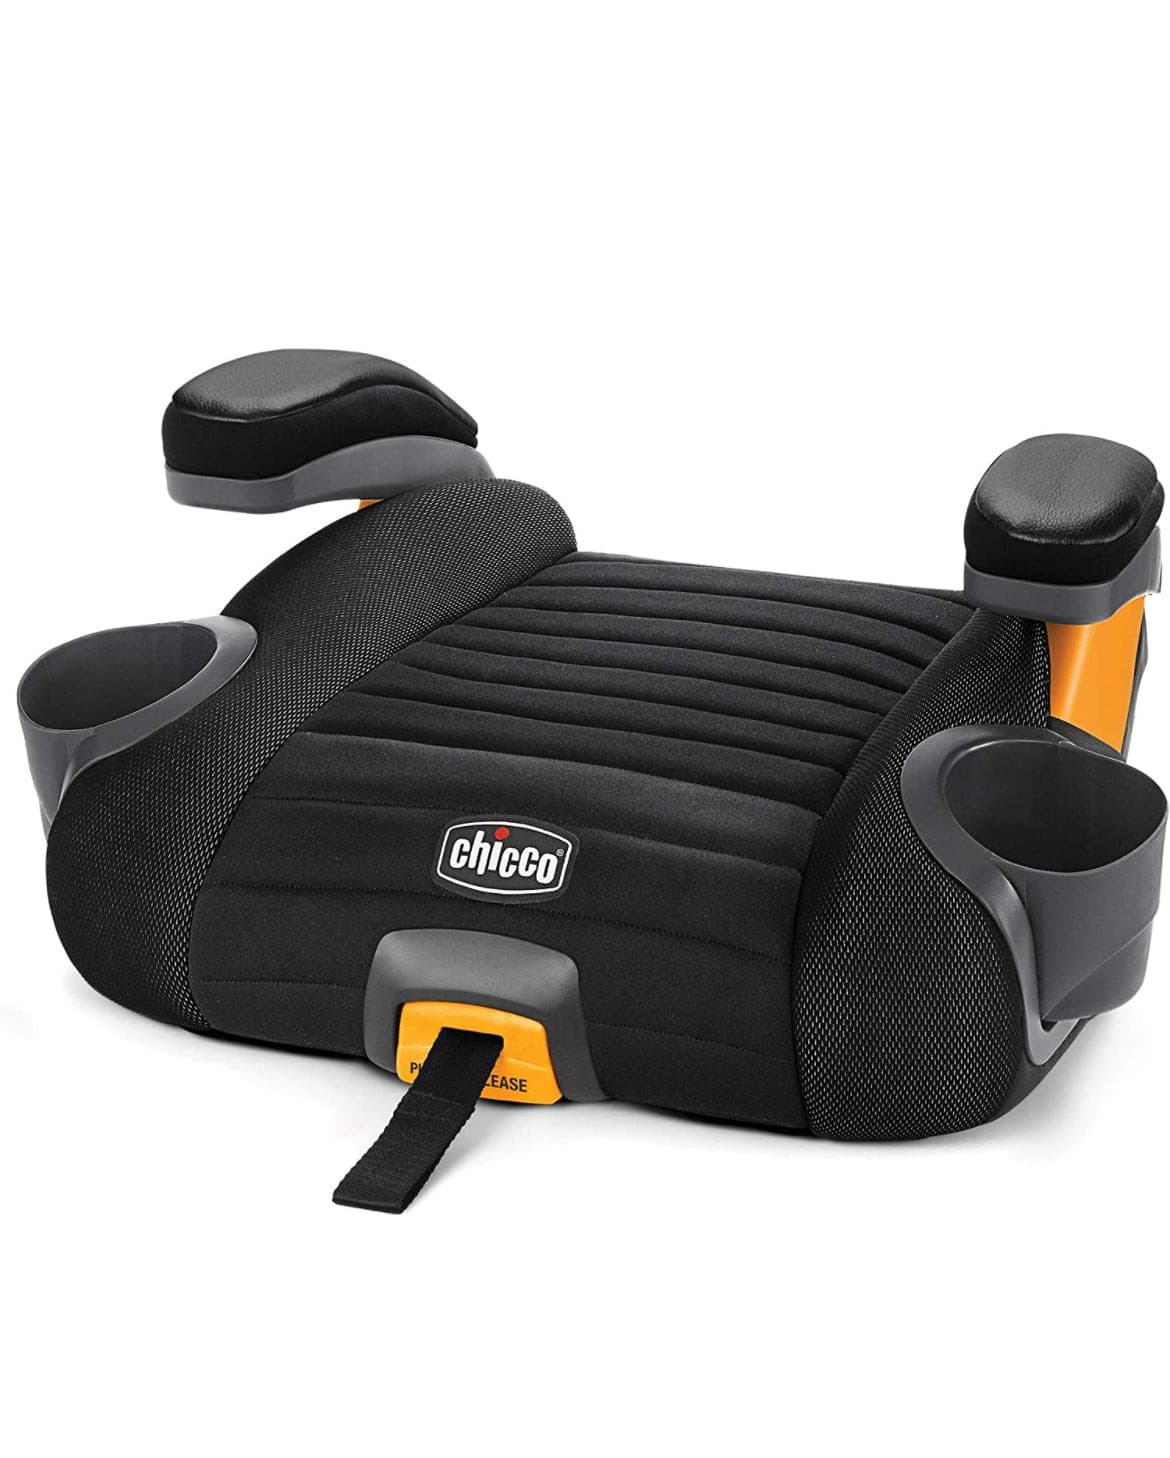 GoFit Plus Backless Booster Car Seat By Chicco.